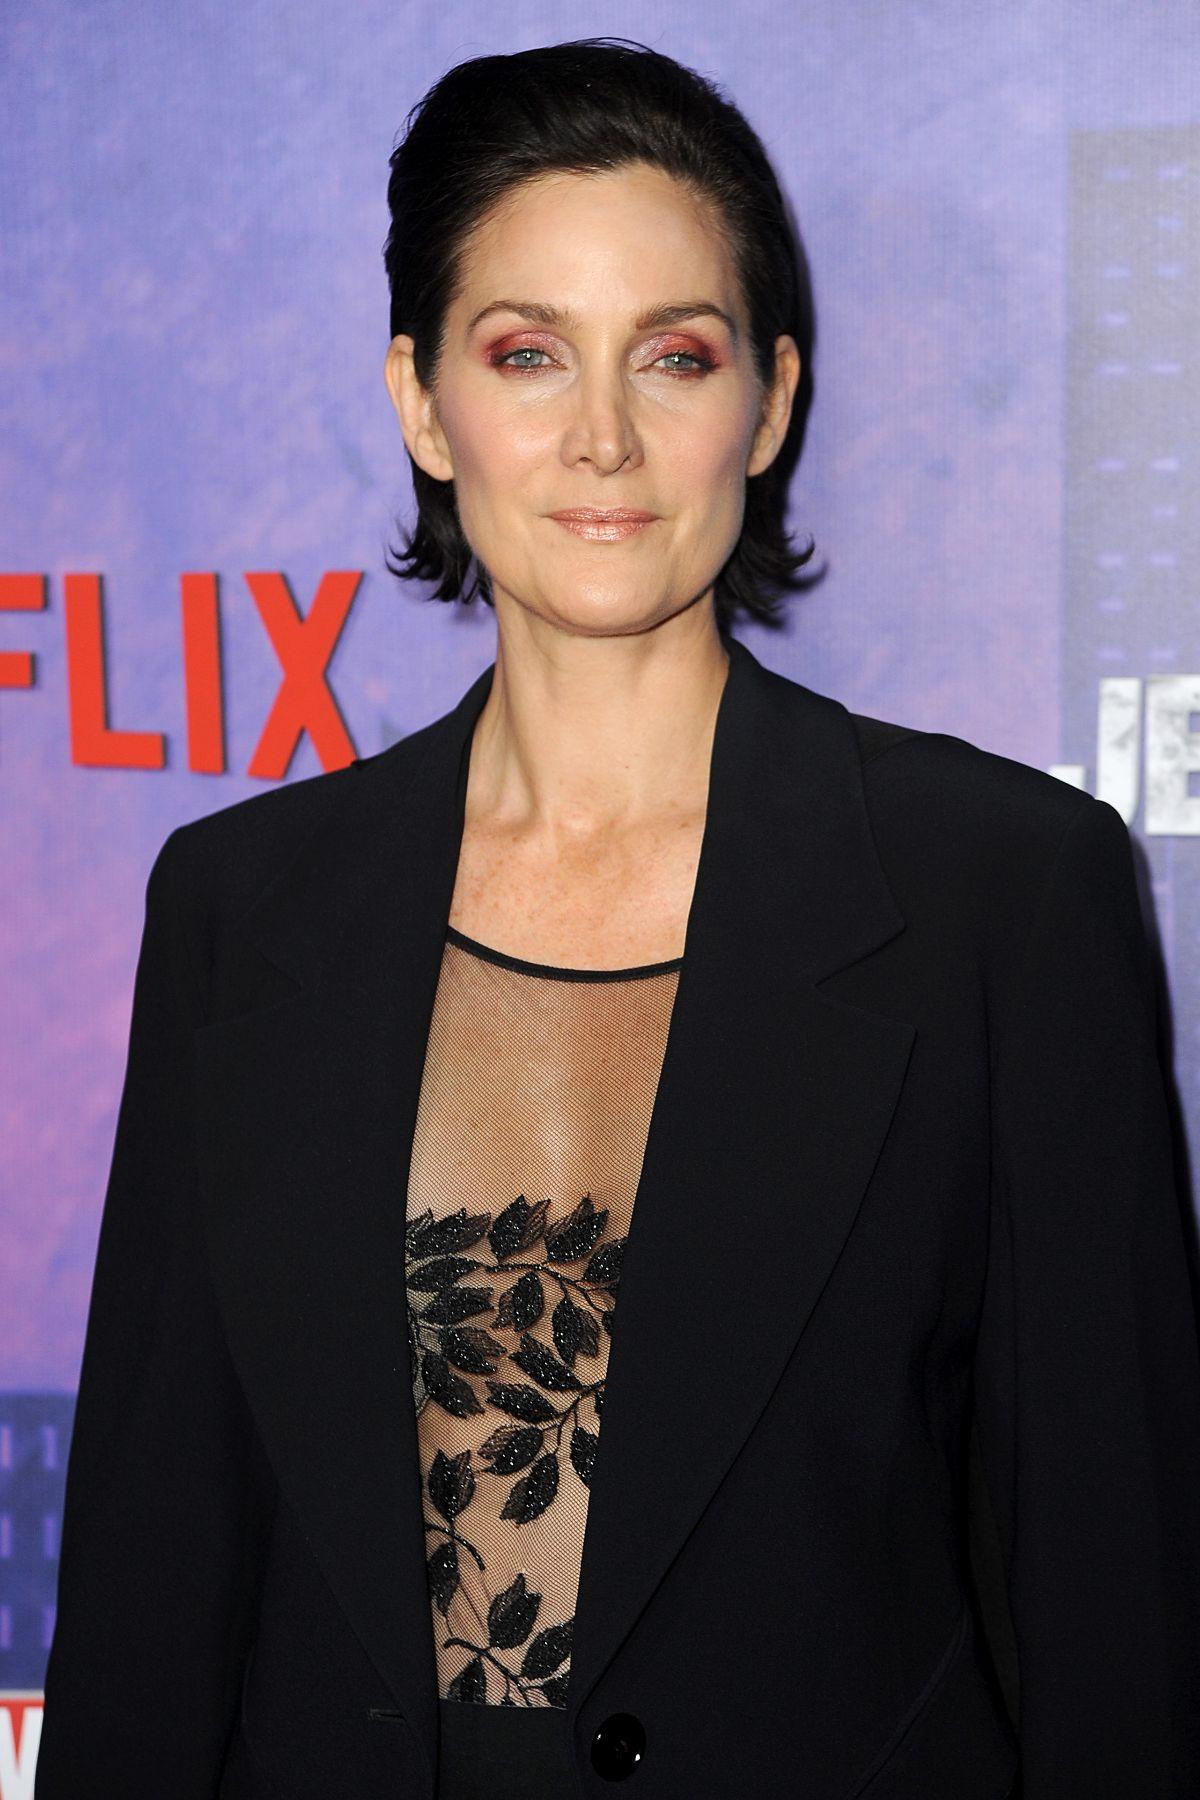 70+ Hot Pictures Of Carrie Anne Moss Will Drive You Nuts For Her 374